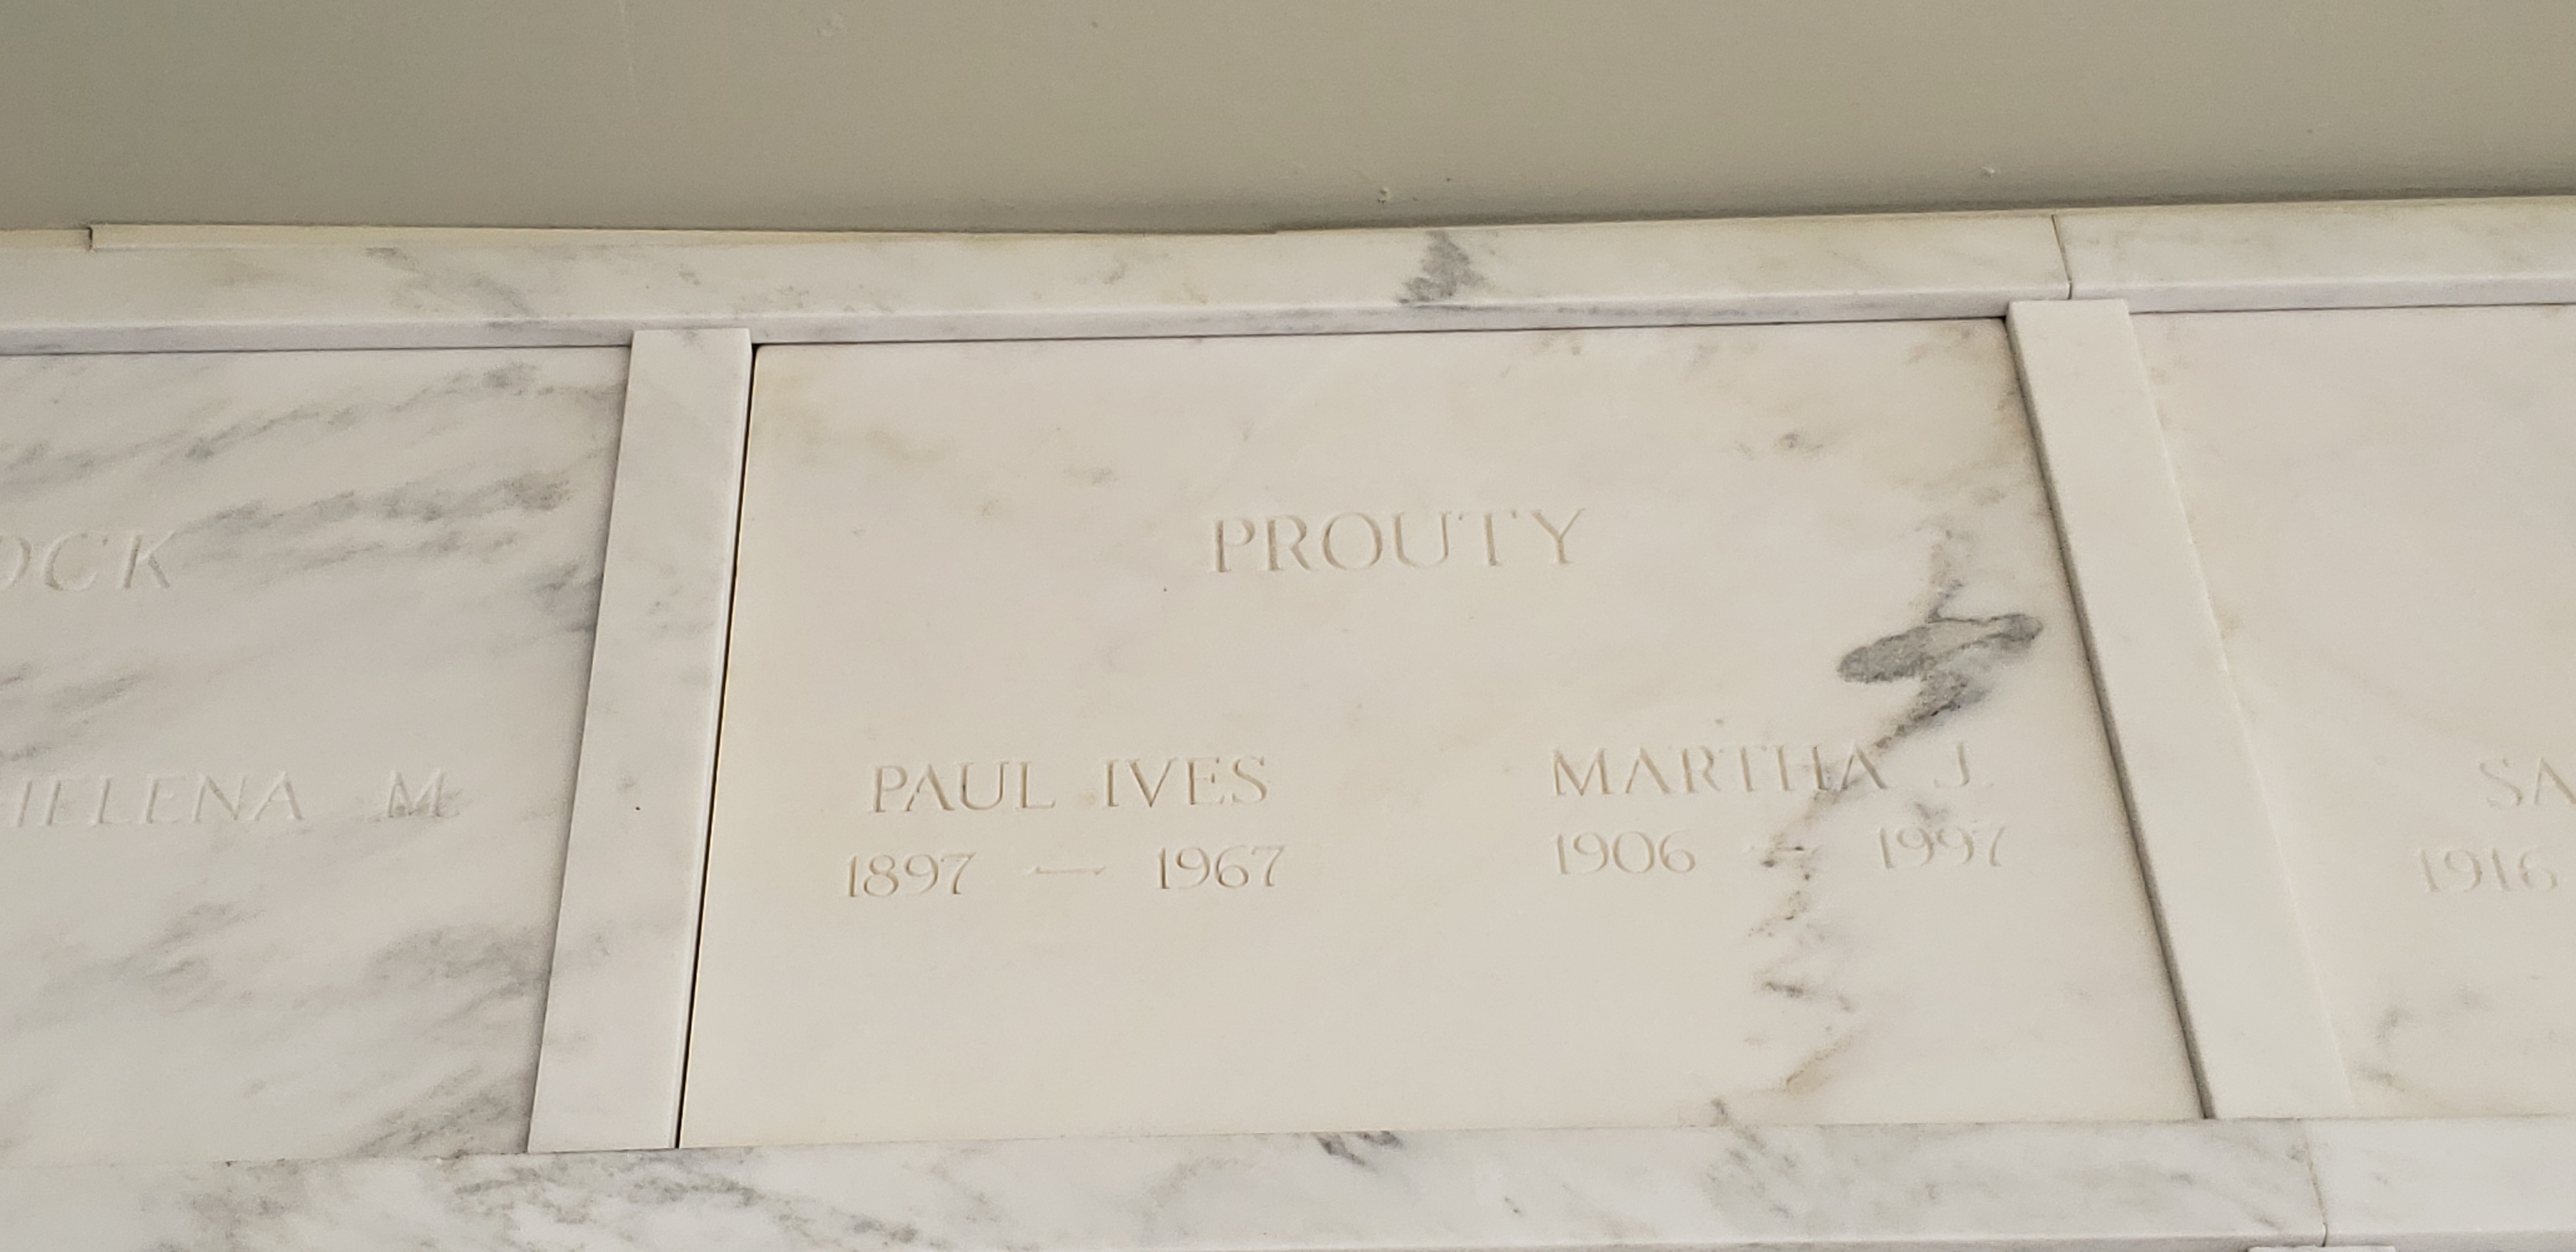 Paul Ives Prouty